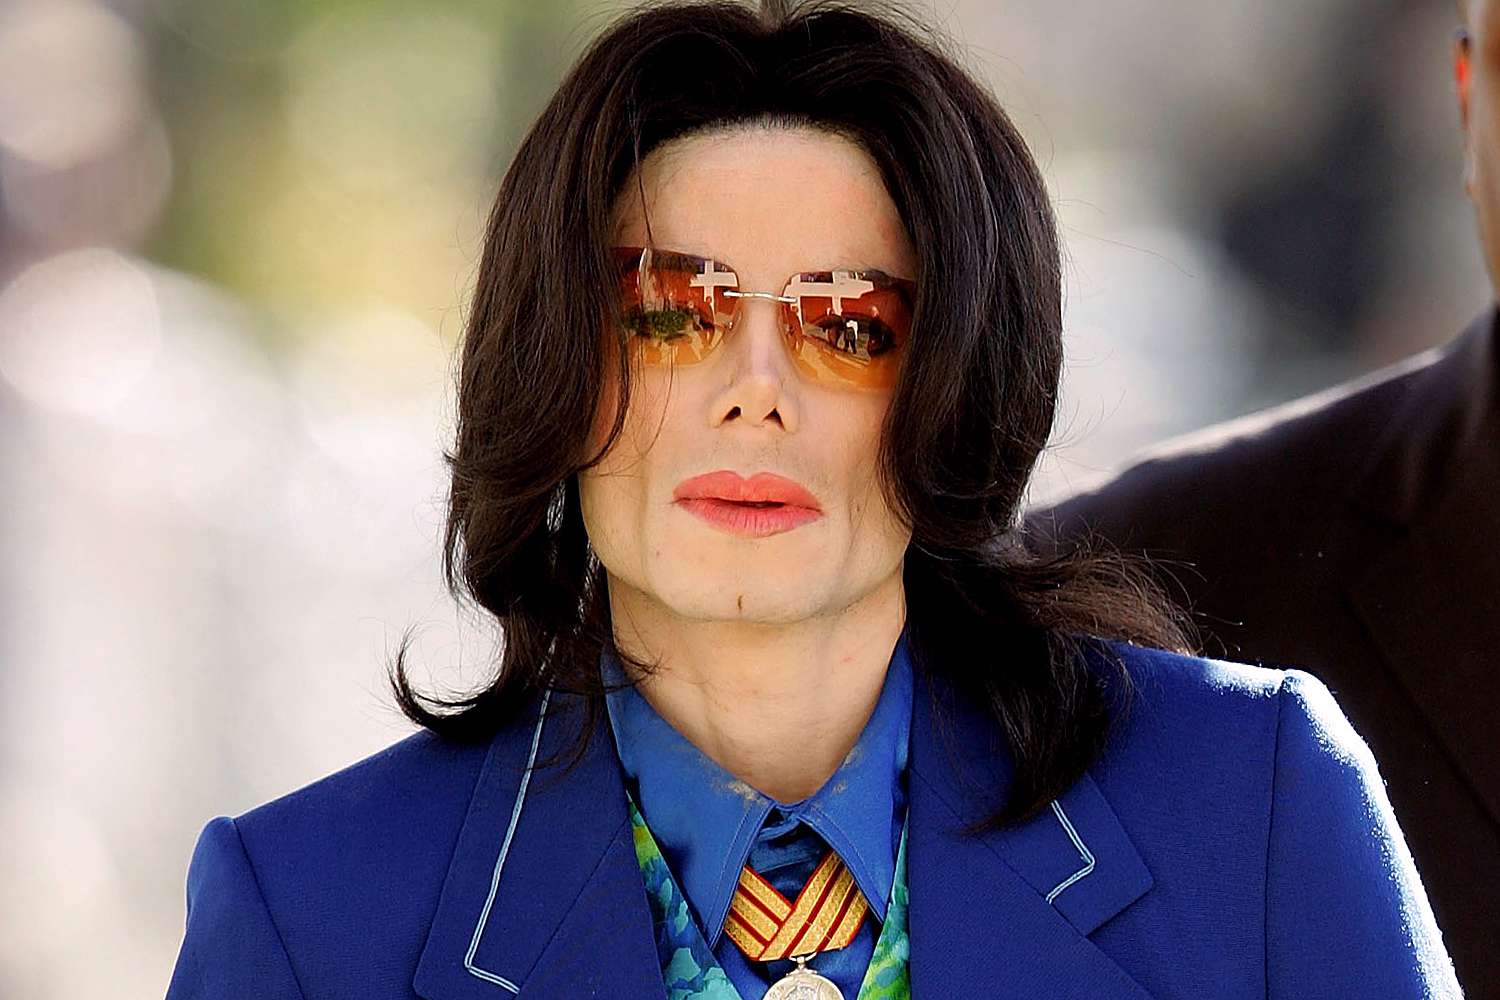 Michael Jackson Was Over $500 Million in Debt at Time of Death, New Court Documents Reveal